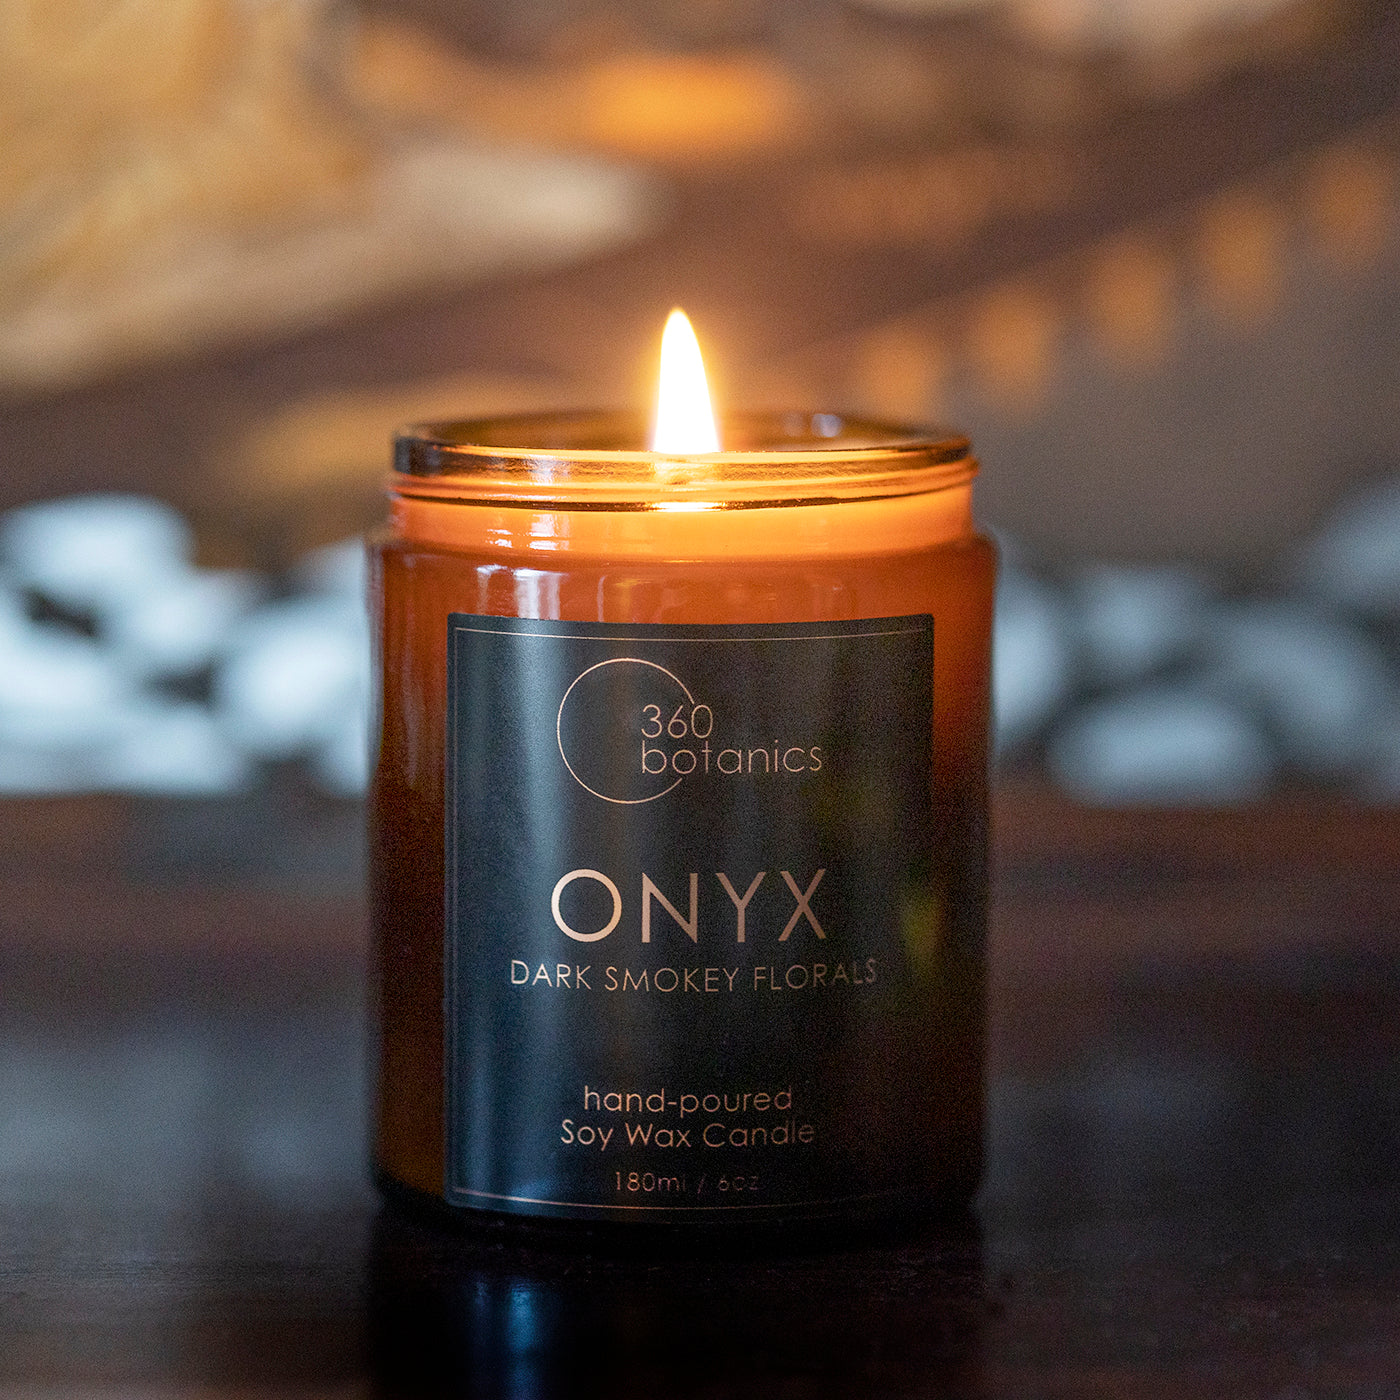 The 360 Botanics ONYX soy wax candle with 'Dark Smokey Florals' scent is featured, gently illuminating a room with its tranquil flame. The amber glass jar adds warmth to the setting, creating an inviting and serene ambiance, perfect for relaxation or as a sophisticated home decor element